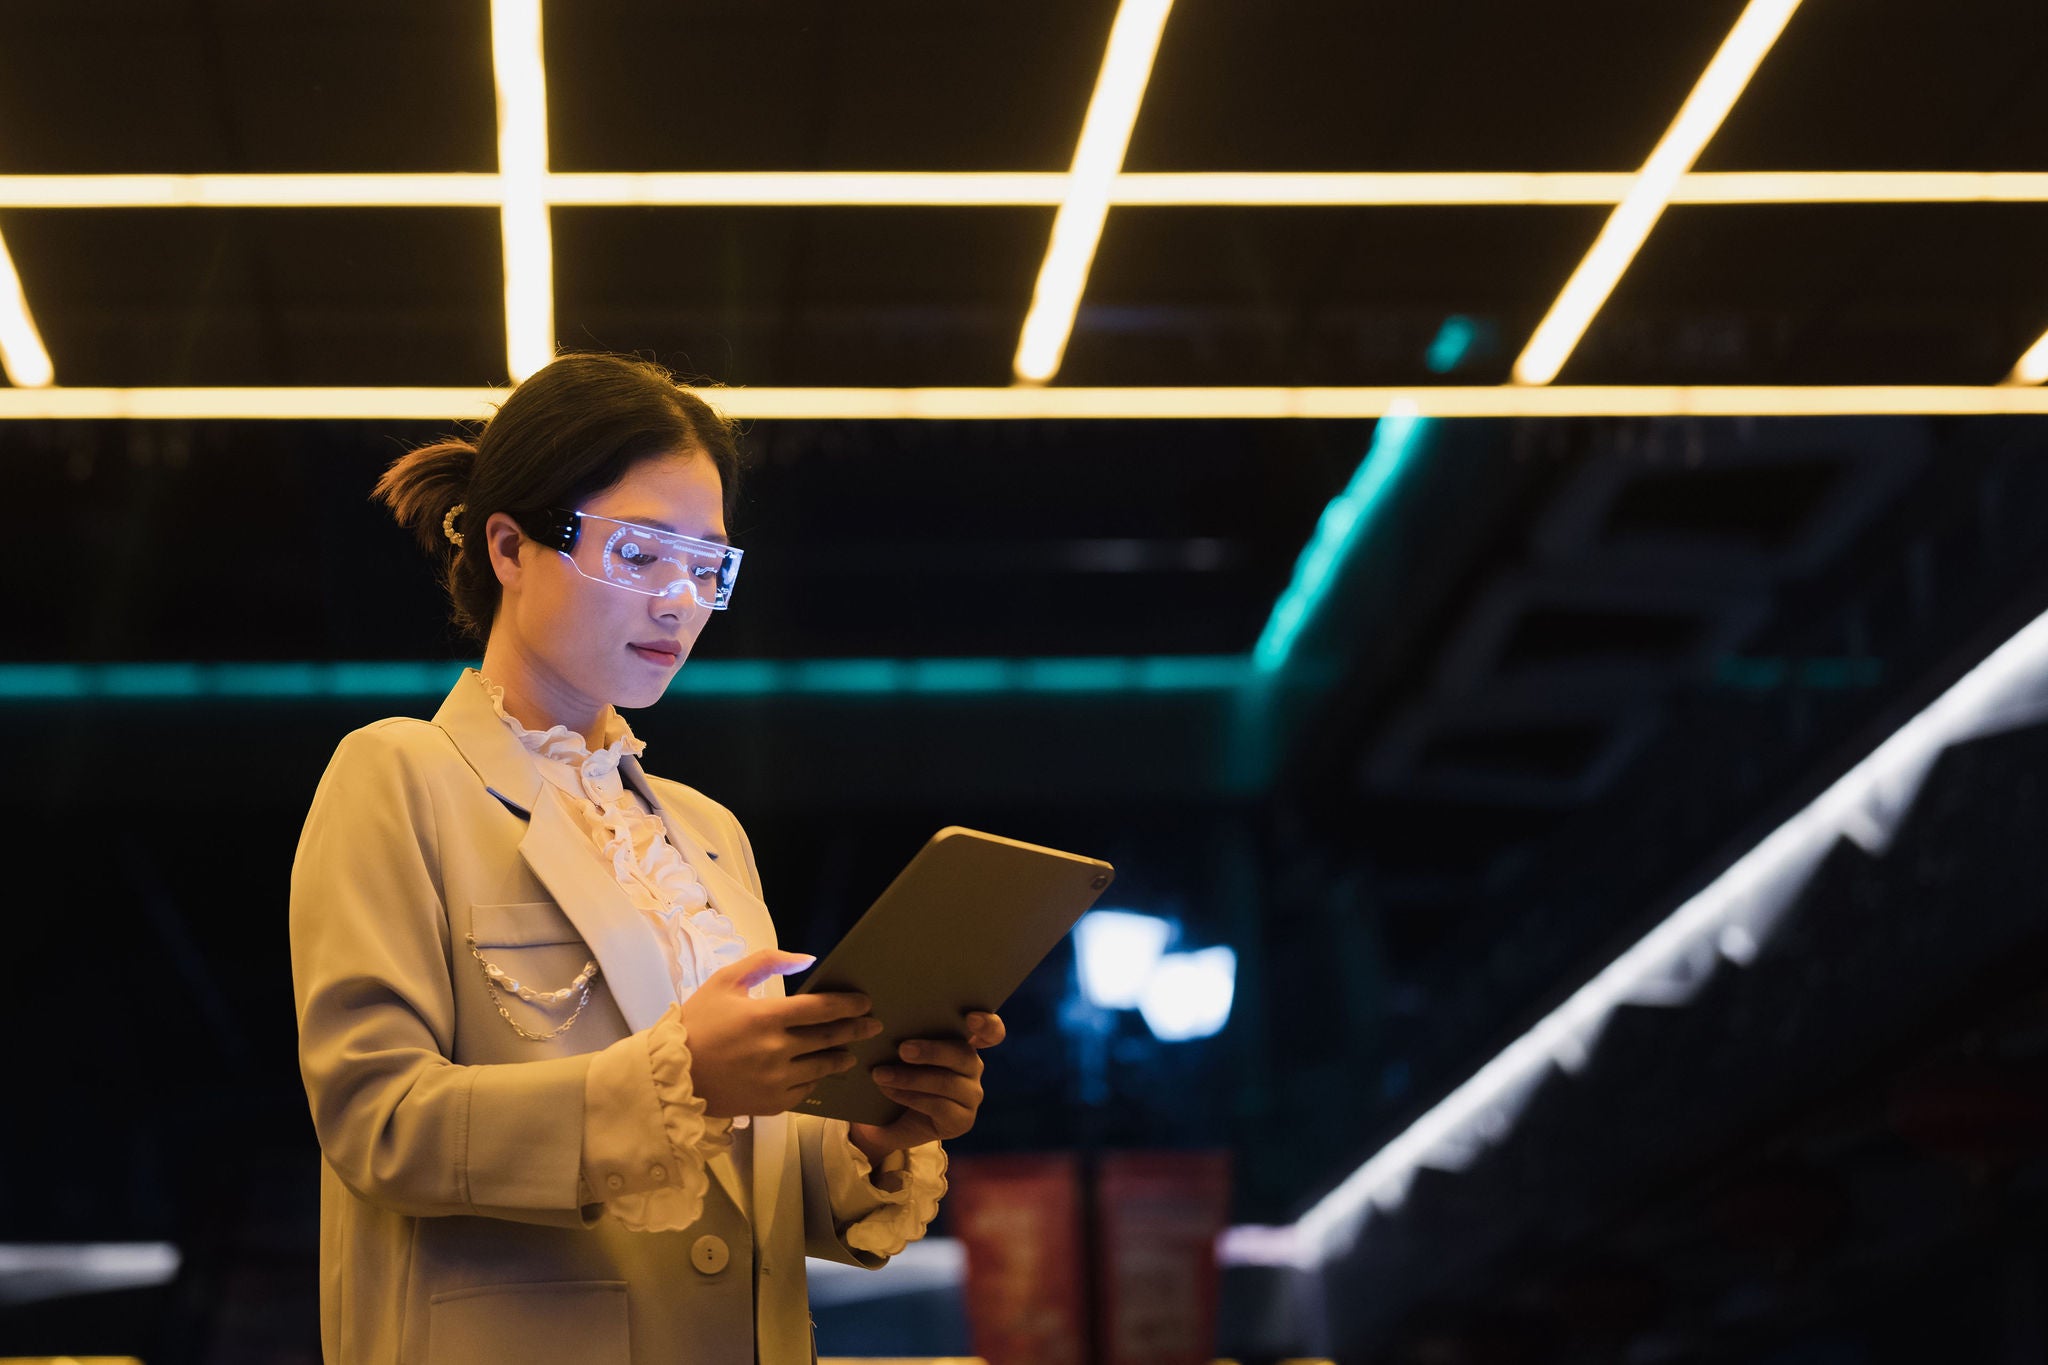 A young Asian business woman wearing glowing smart glasses uses a tablet in a city street at night. Concepts such as augmented reality, artificial intelligence, smart cities, metaverse, post-humanism are expressed.